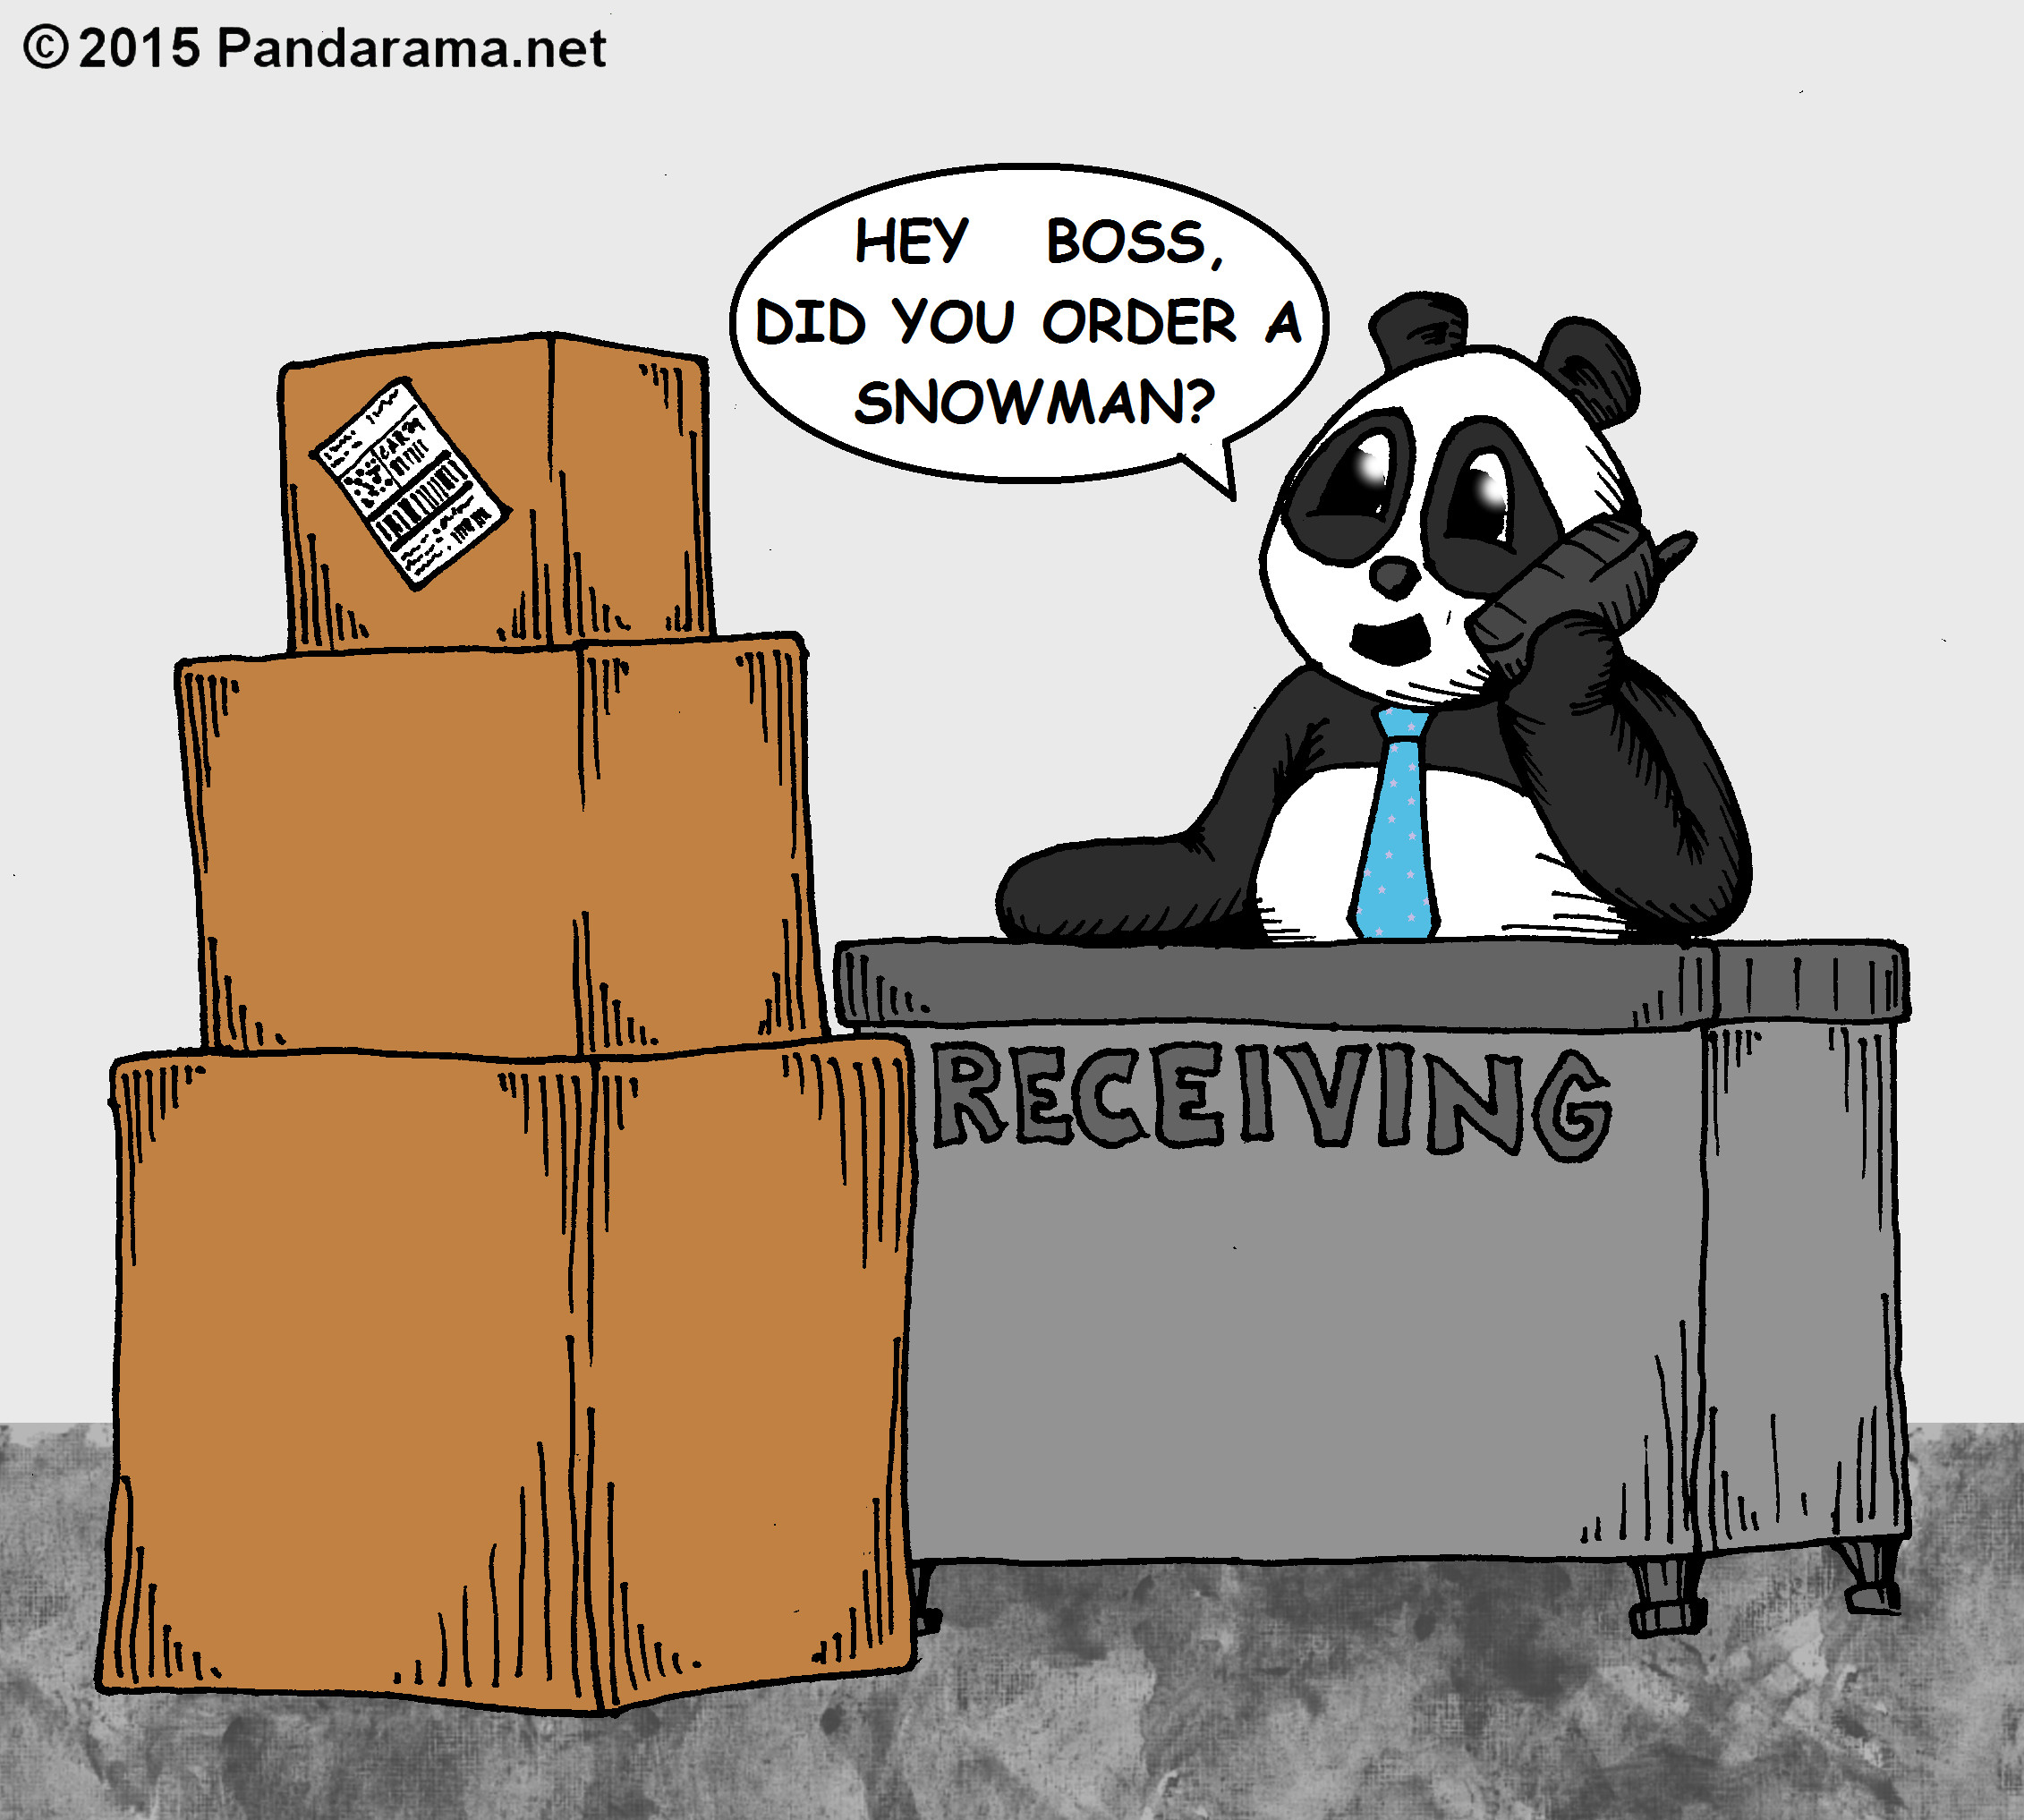 Pandarama cartoon of three boxes stacked in a receiving department and the panda clerk thinks it's a snowman.